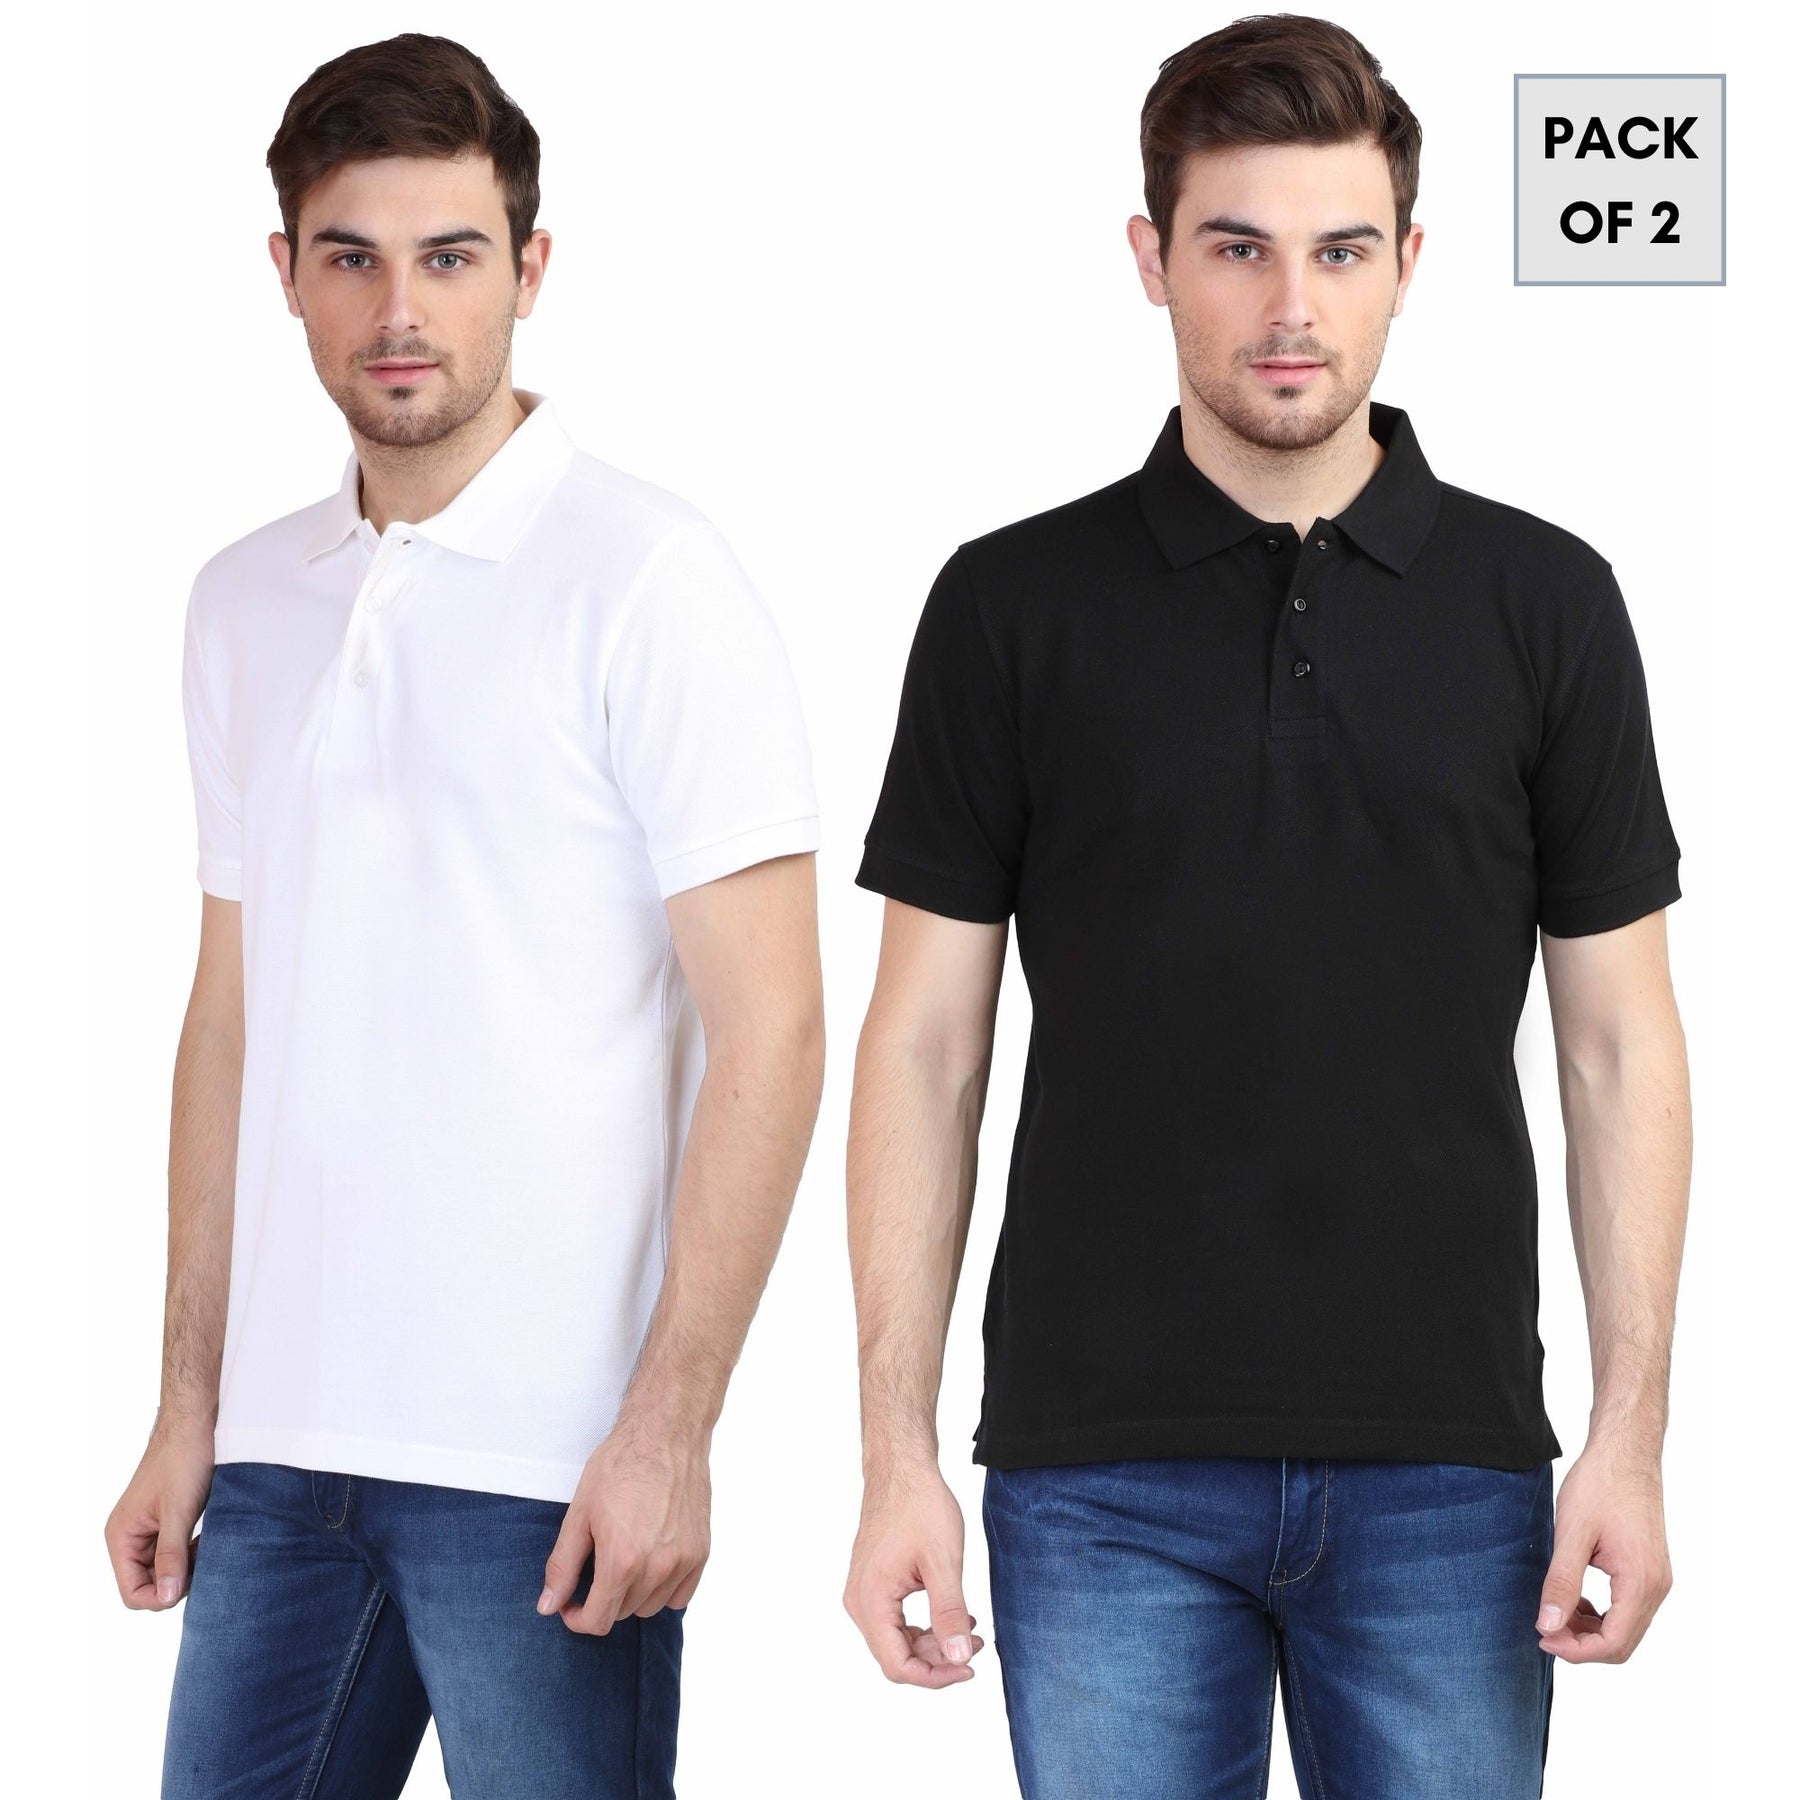 pack-of-2-two-men-s-classic-polo-neck-cotton-t-shirt-gogirgit